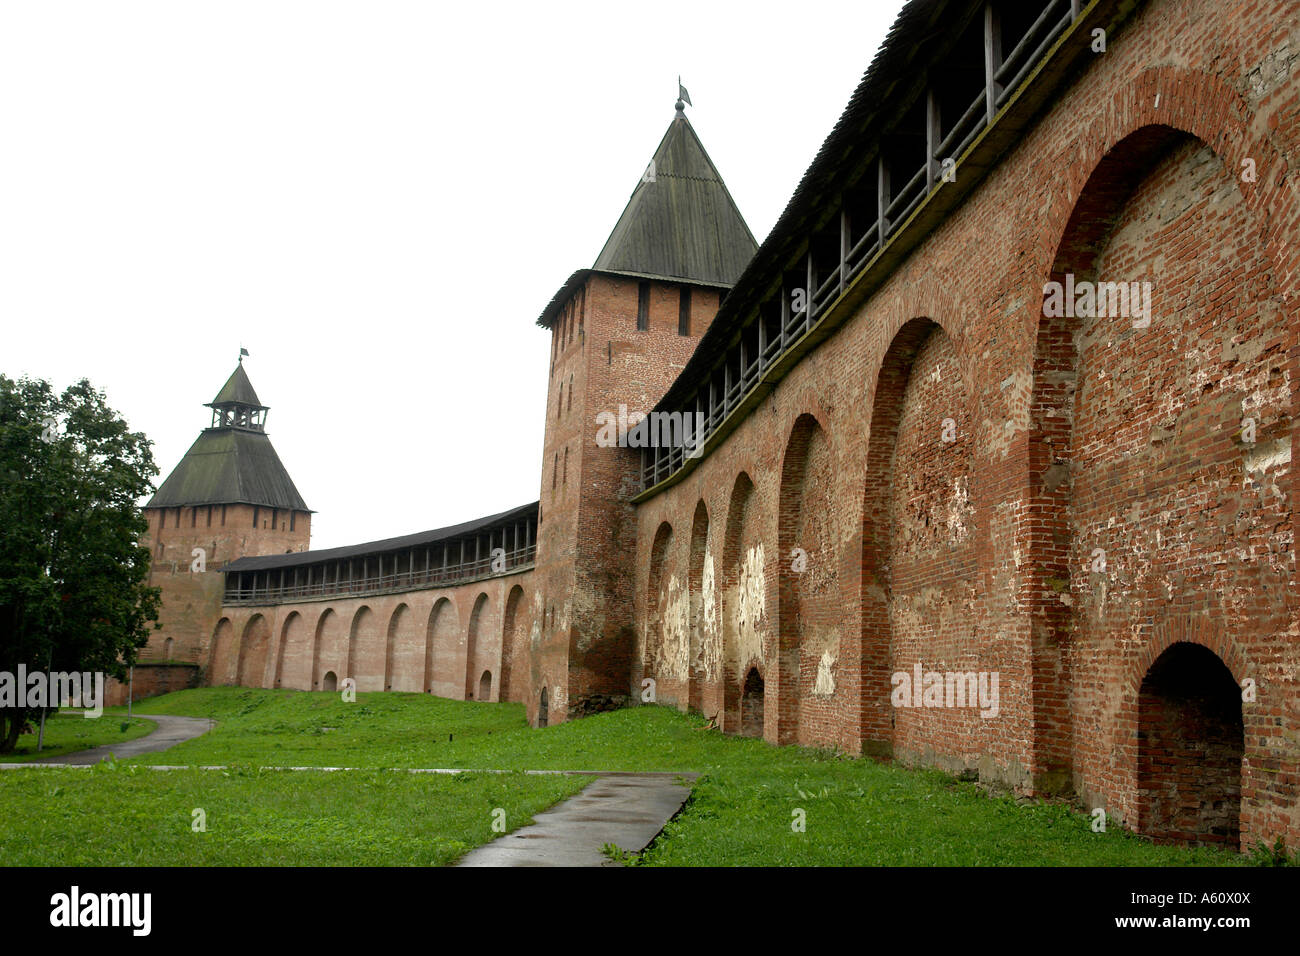 Painet jj1921 russia kremlin veliky novgorod 20060801 2 architecture europe eastern fortification country developing nation Stock Photo